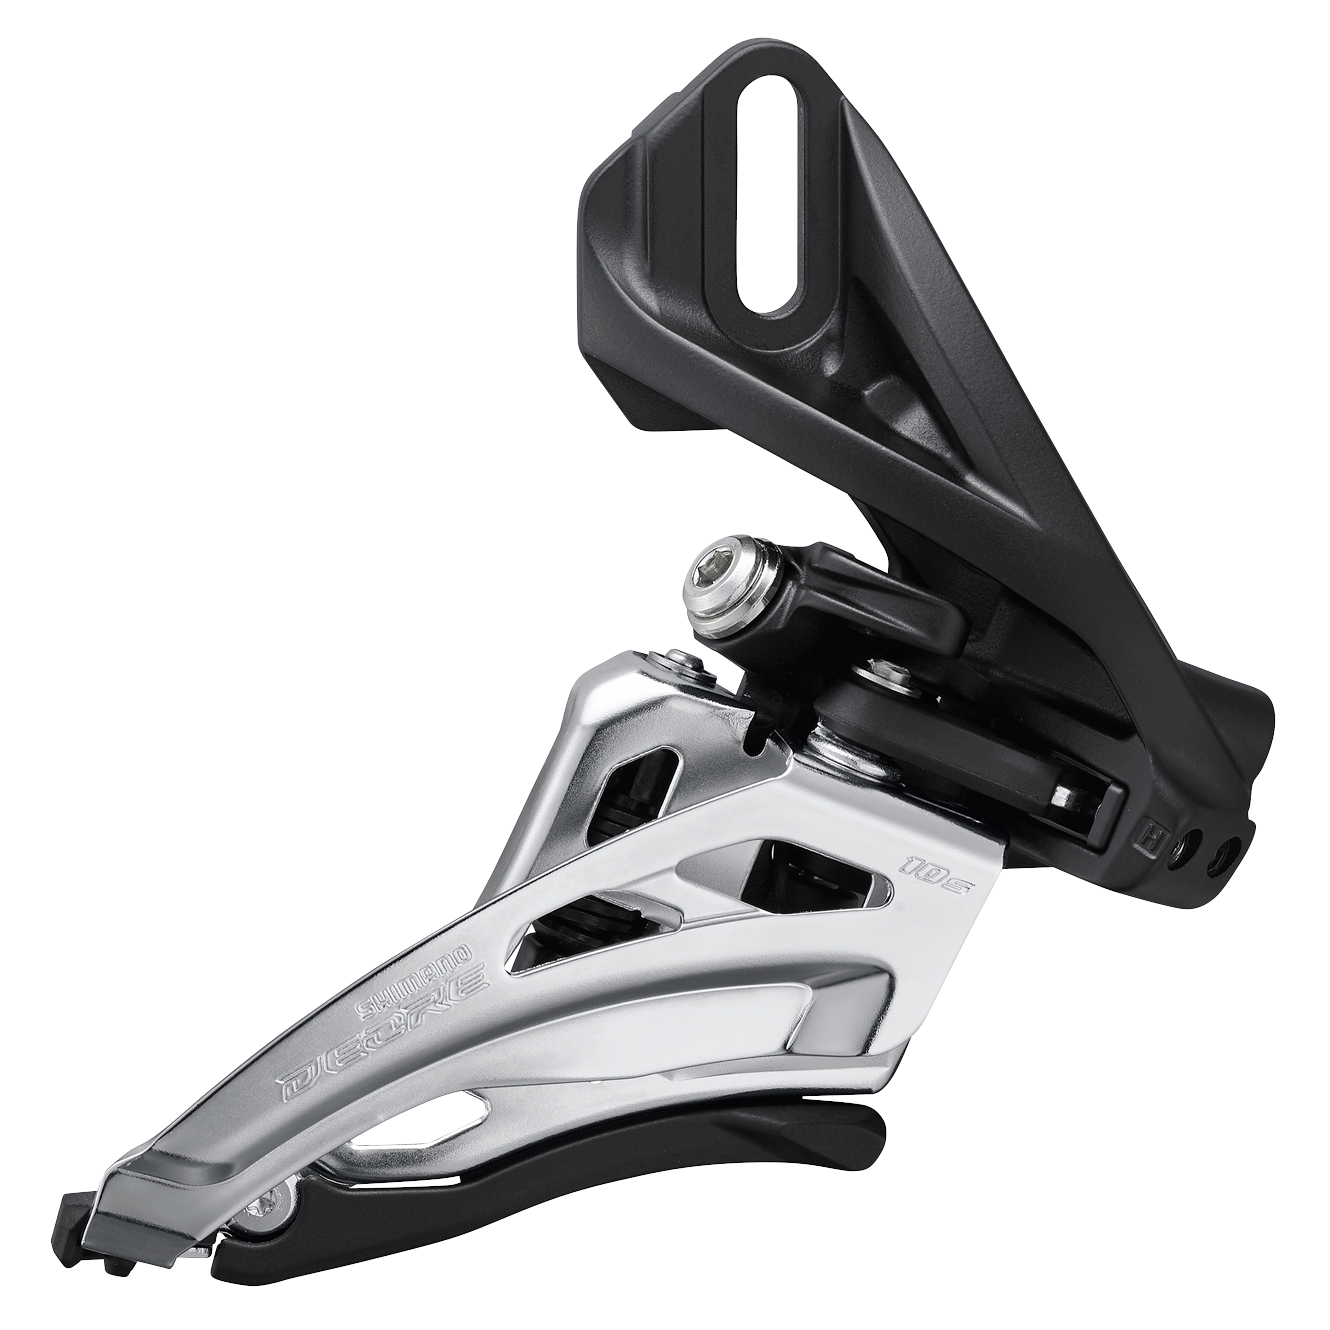 Productfoto van Shimano Deore FD-M4100 Side Swing Front Derailleur - 2x10-speed - Front Pull